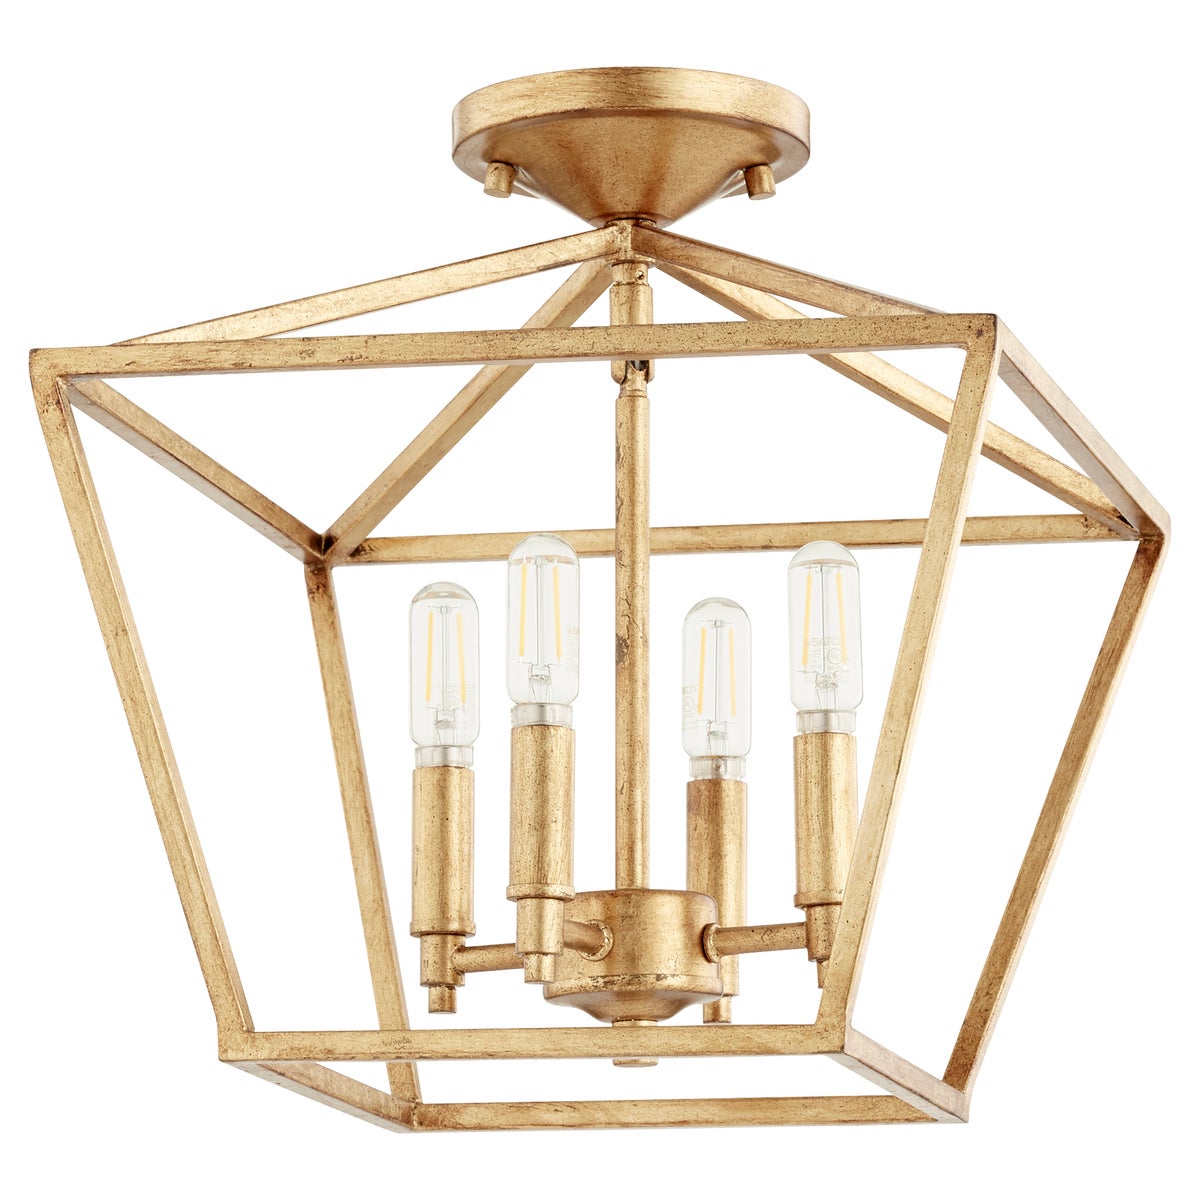 A gold chandelier with four candelabra bulbs, perfect for farmhouse charm in your kitchen or living room. 13"W x 13.75"H.